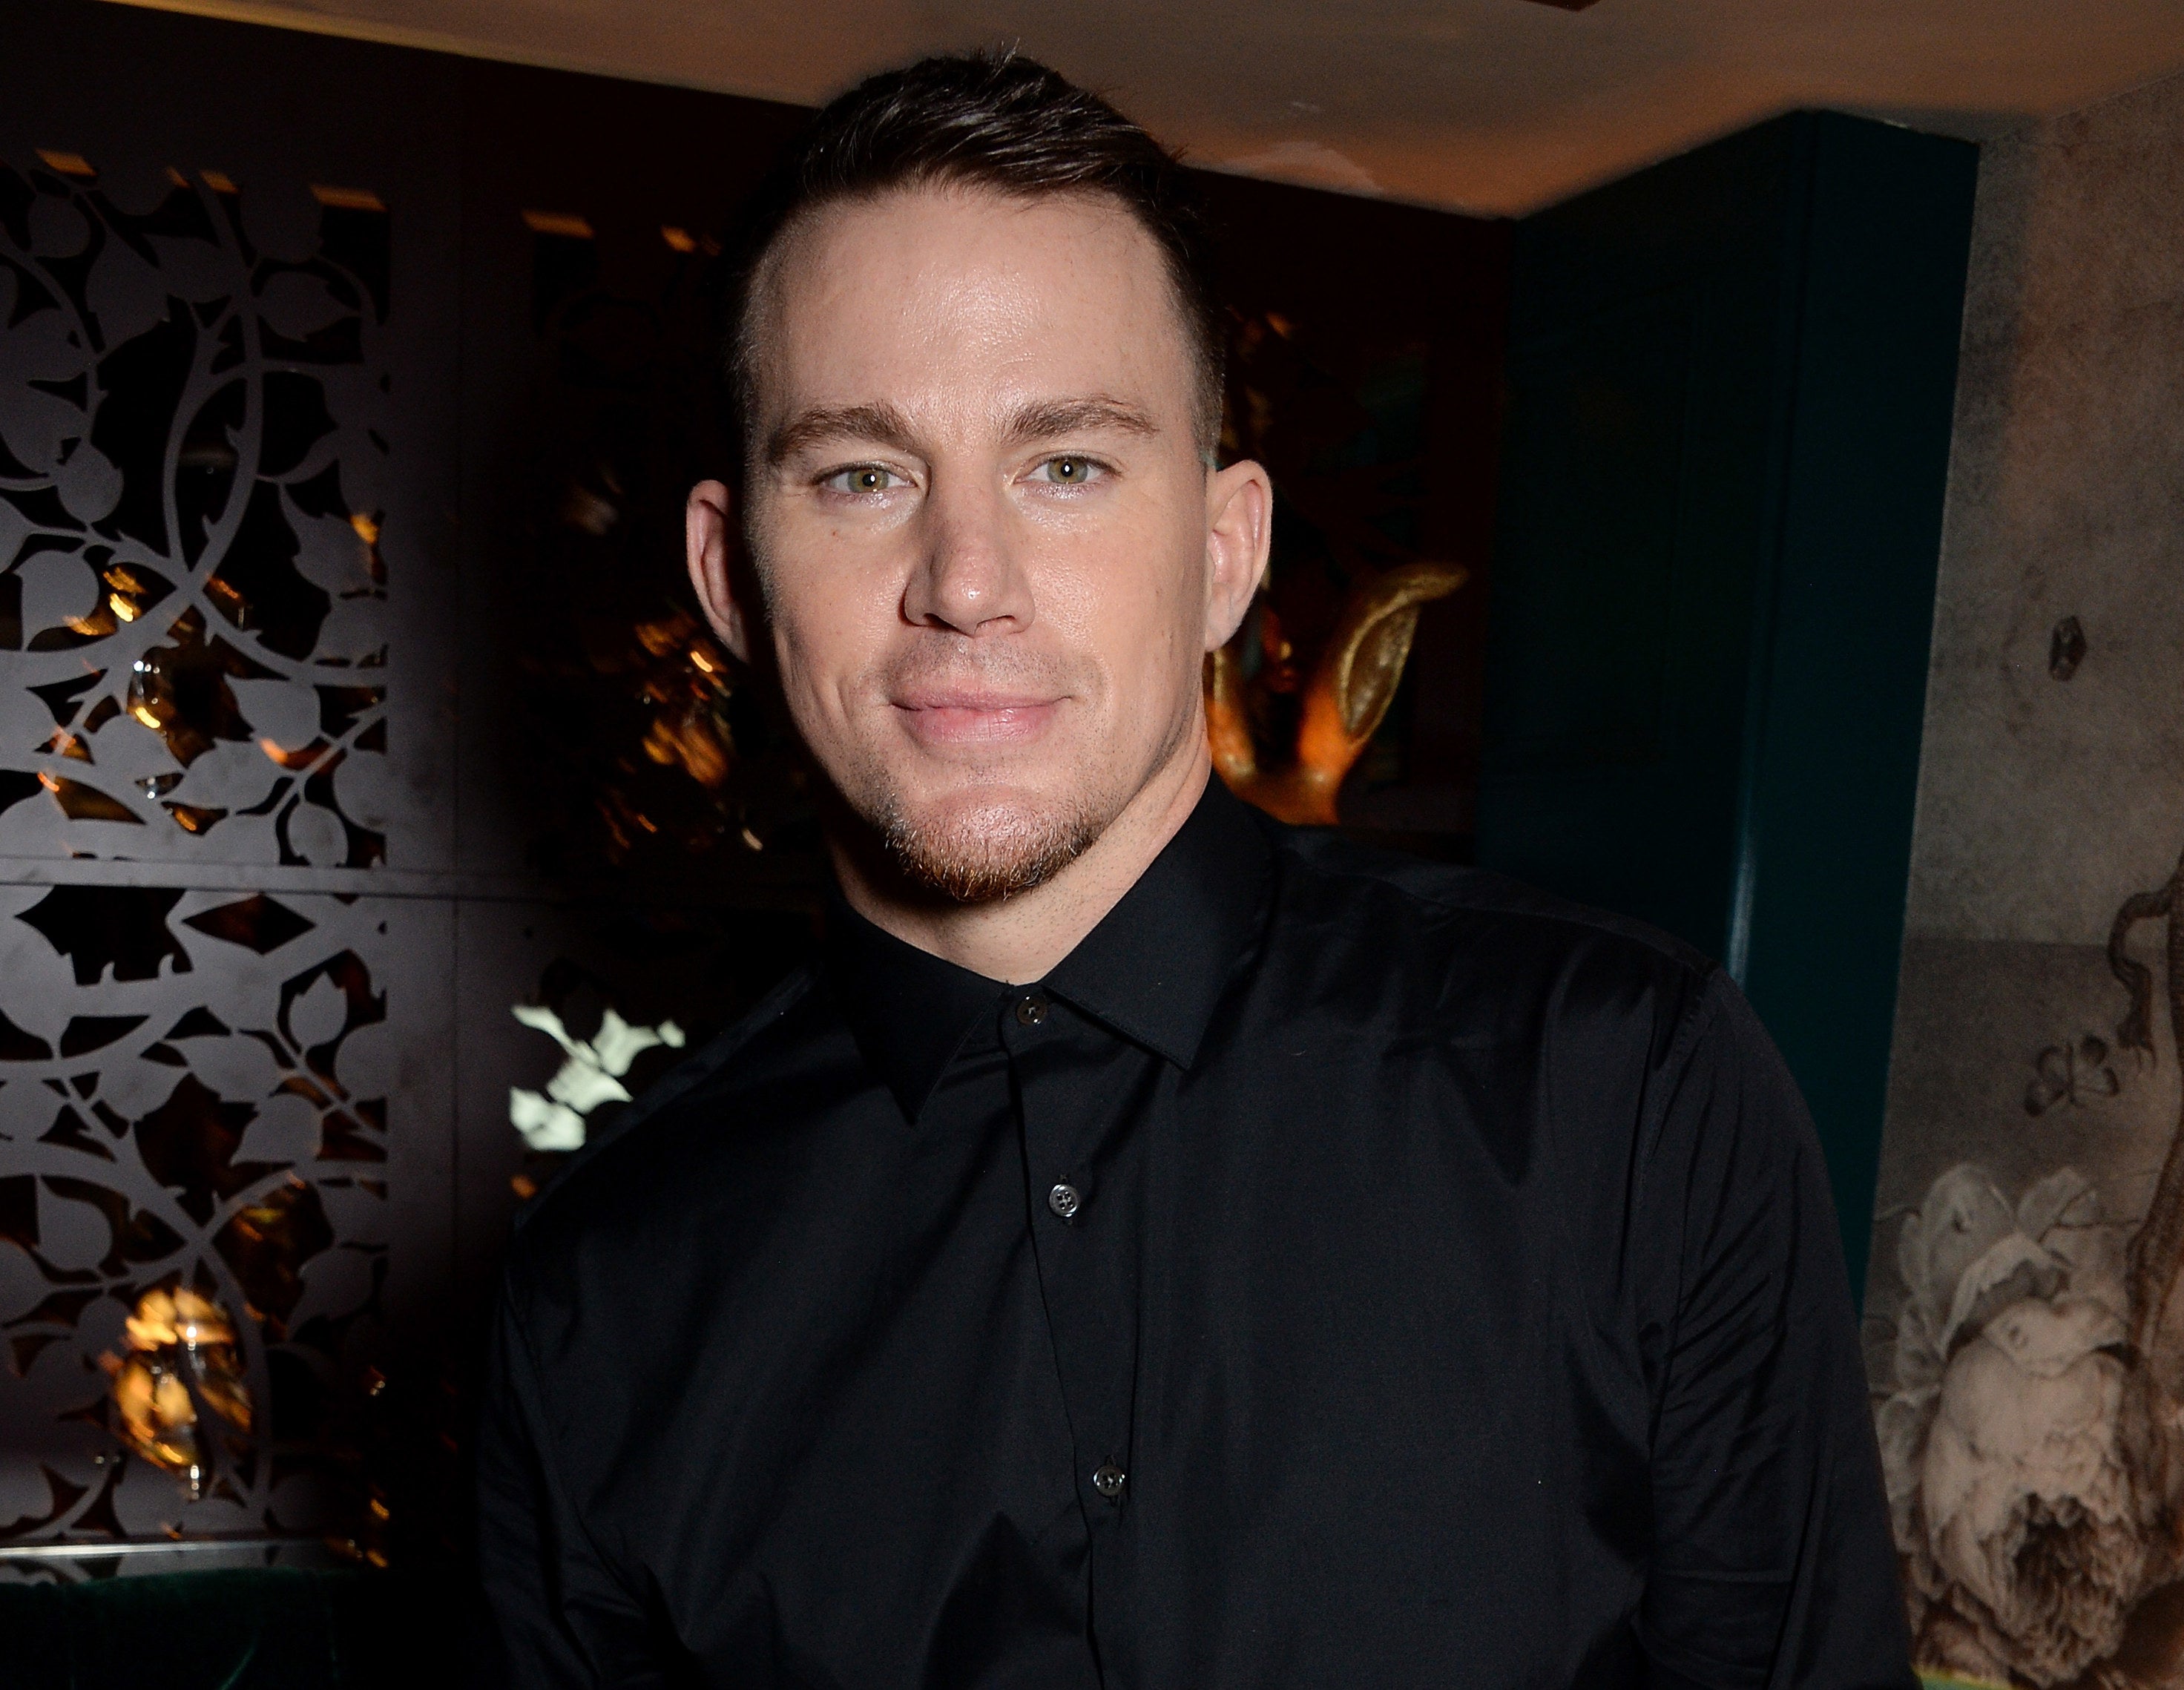 Channing attends and event in a black suit